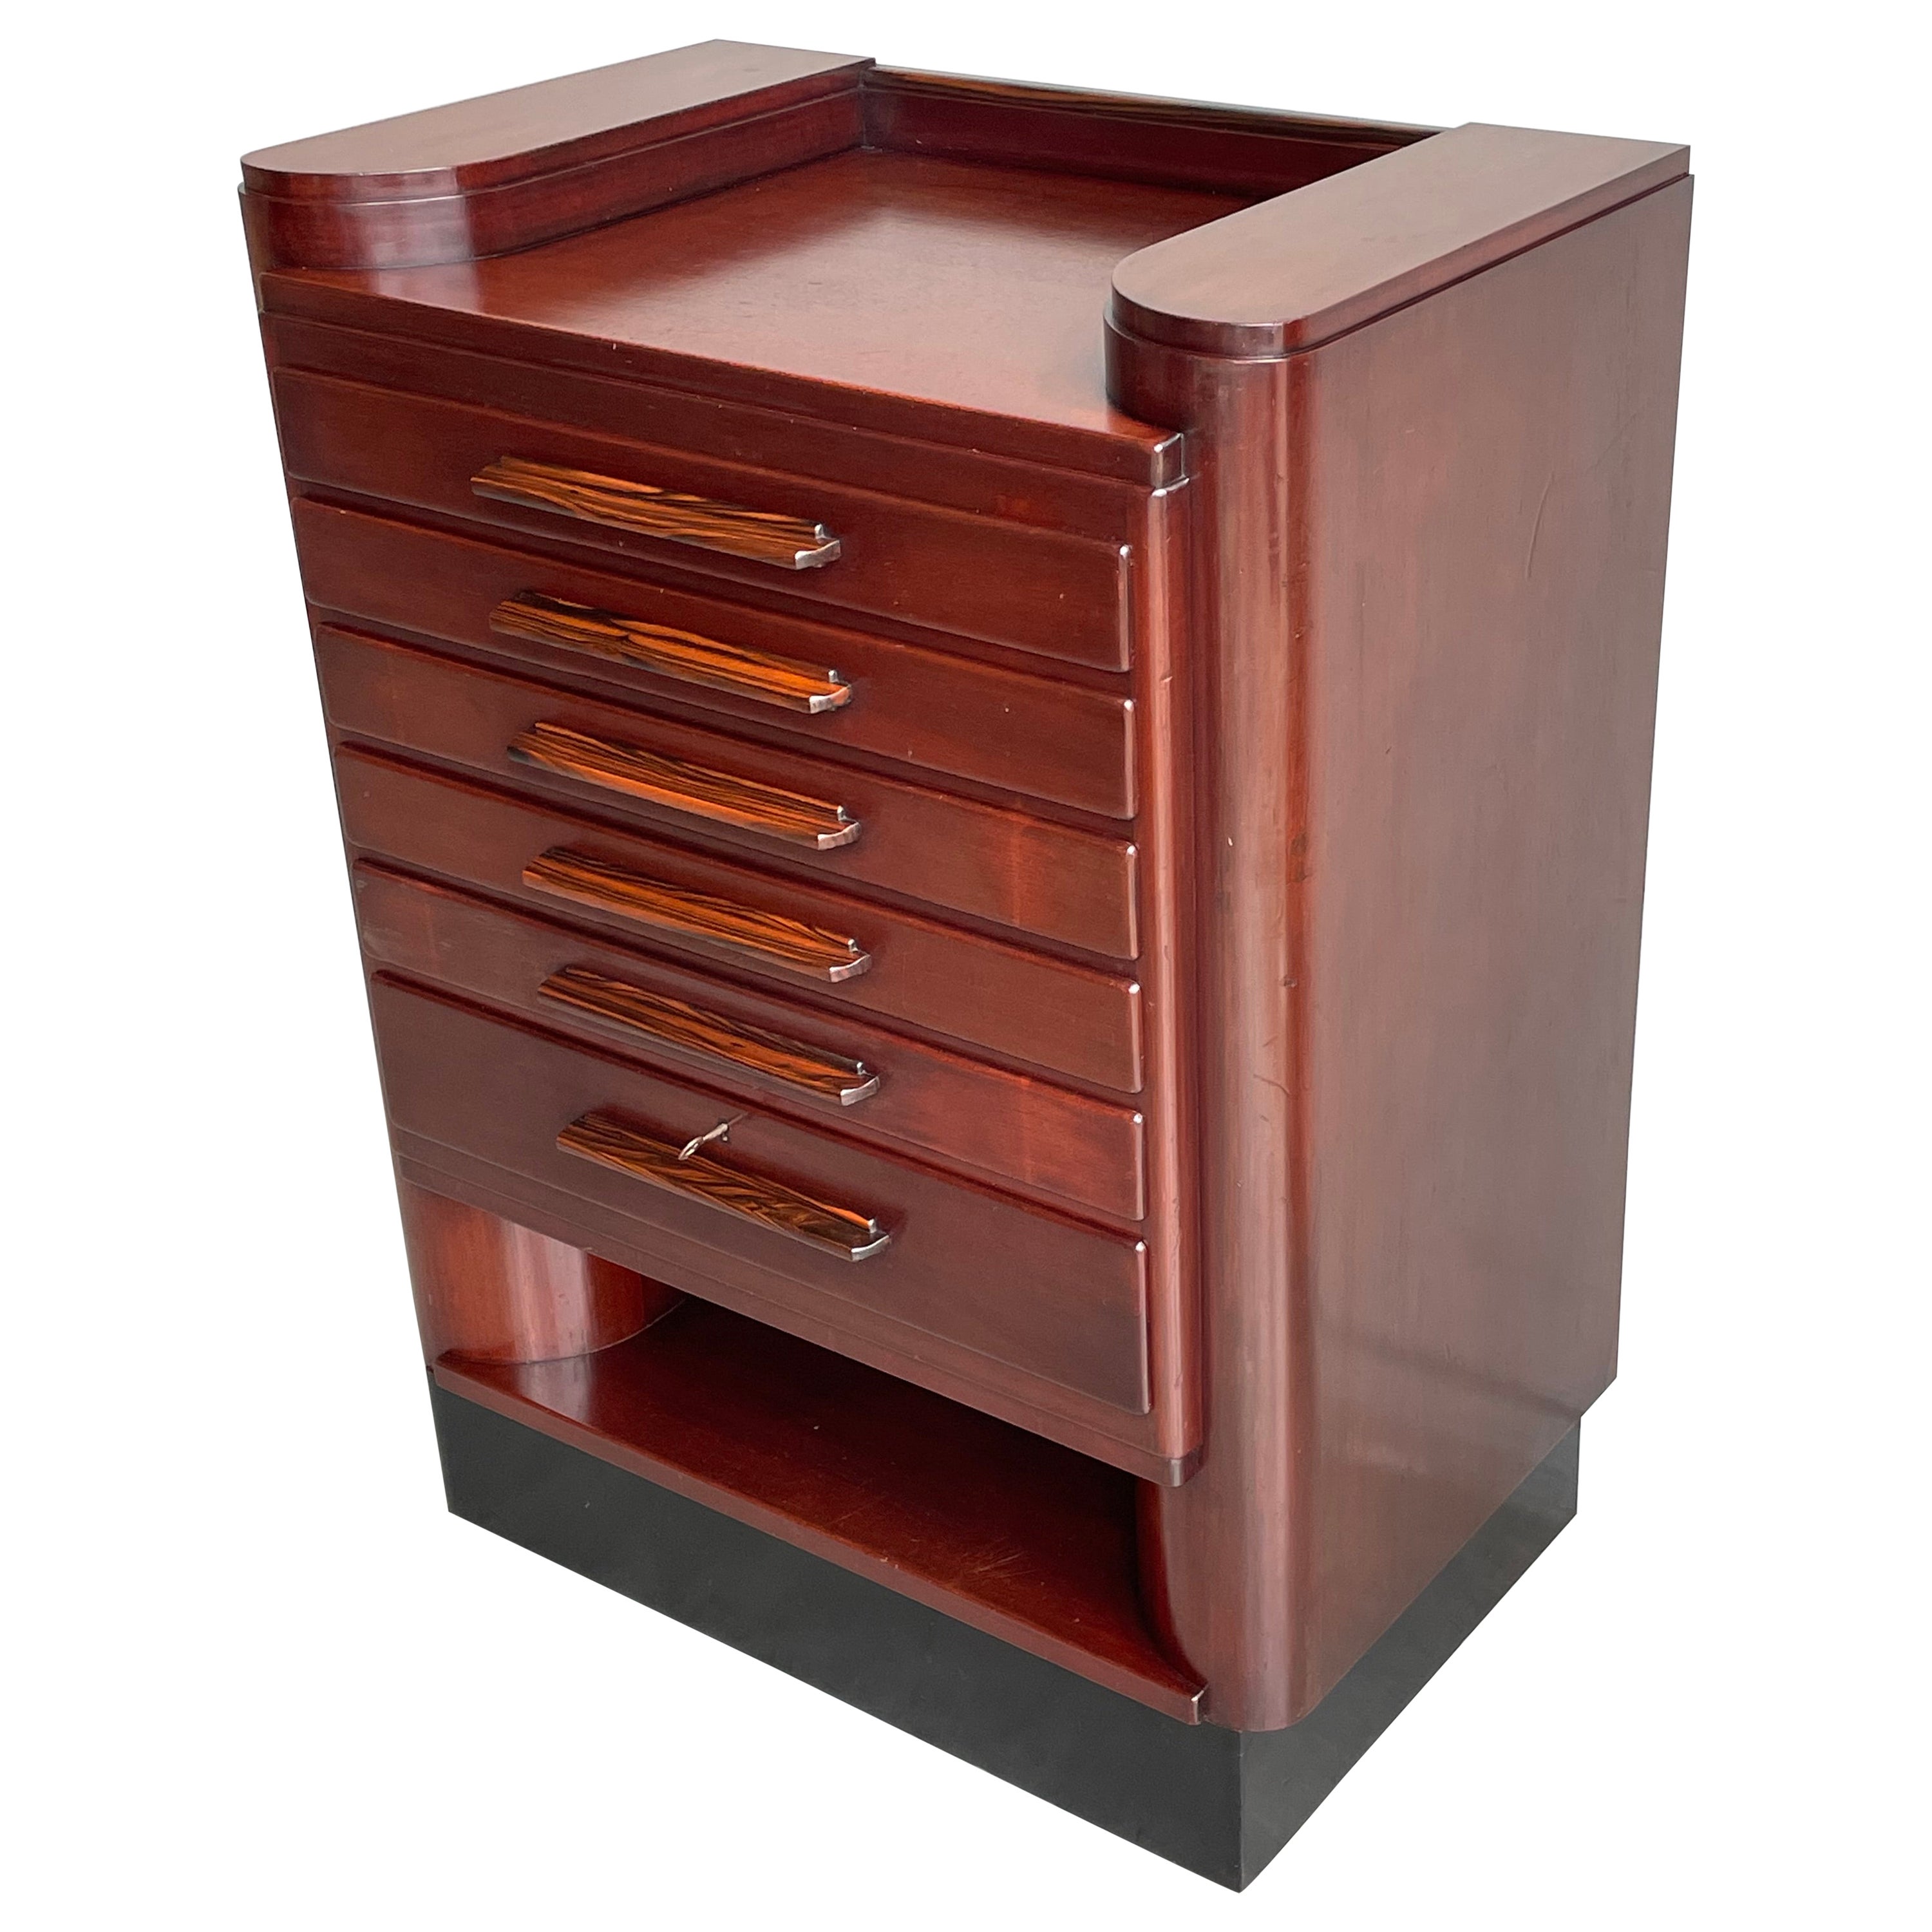 Rare Art Deco Chest of Drawers / Filing Cabinet with Stunning Coromandel Handles For Sale